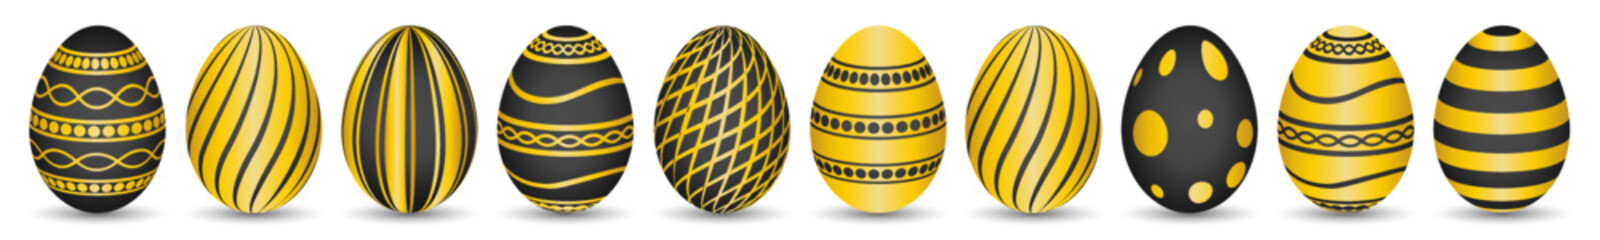 Vector - 10 Easter eggs in black-gold on white background. Vacation concept. - 572956668